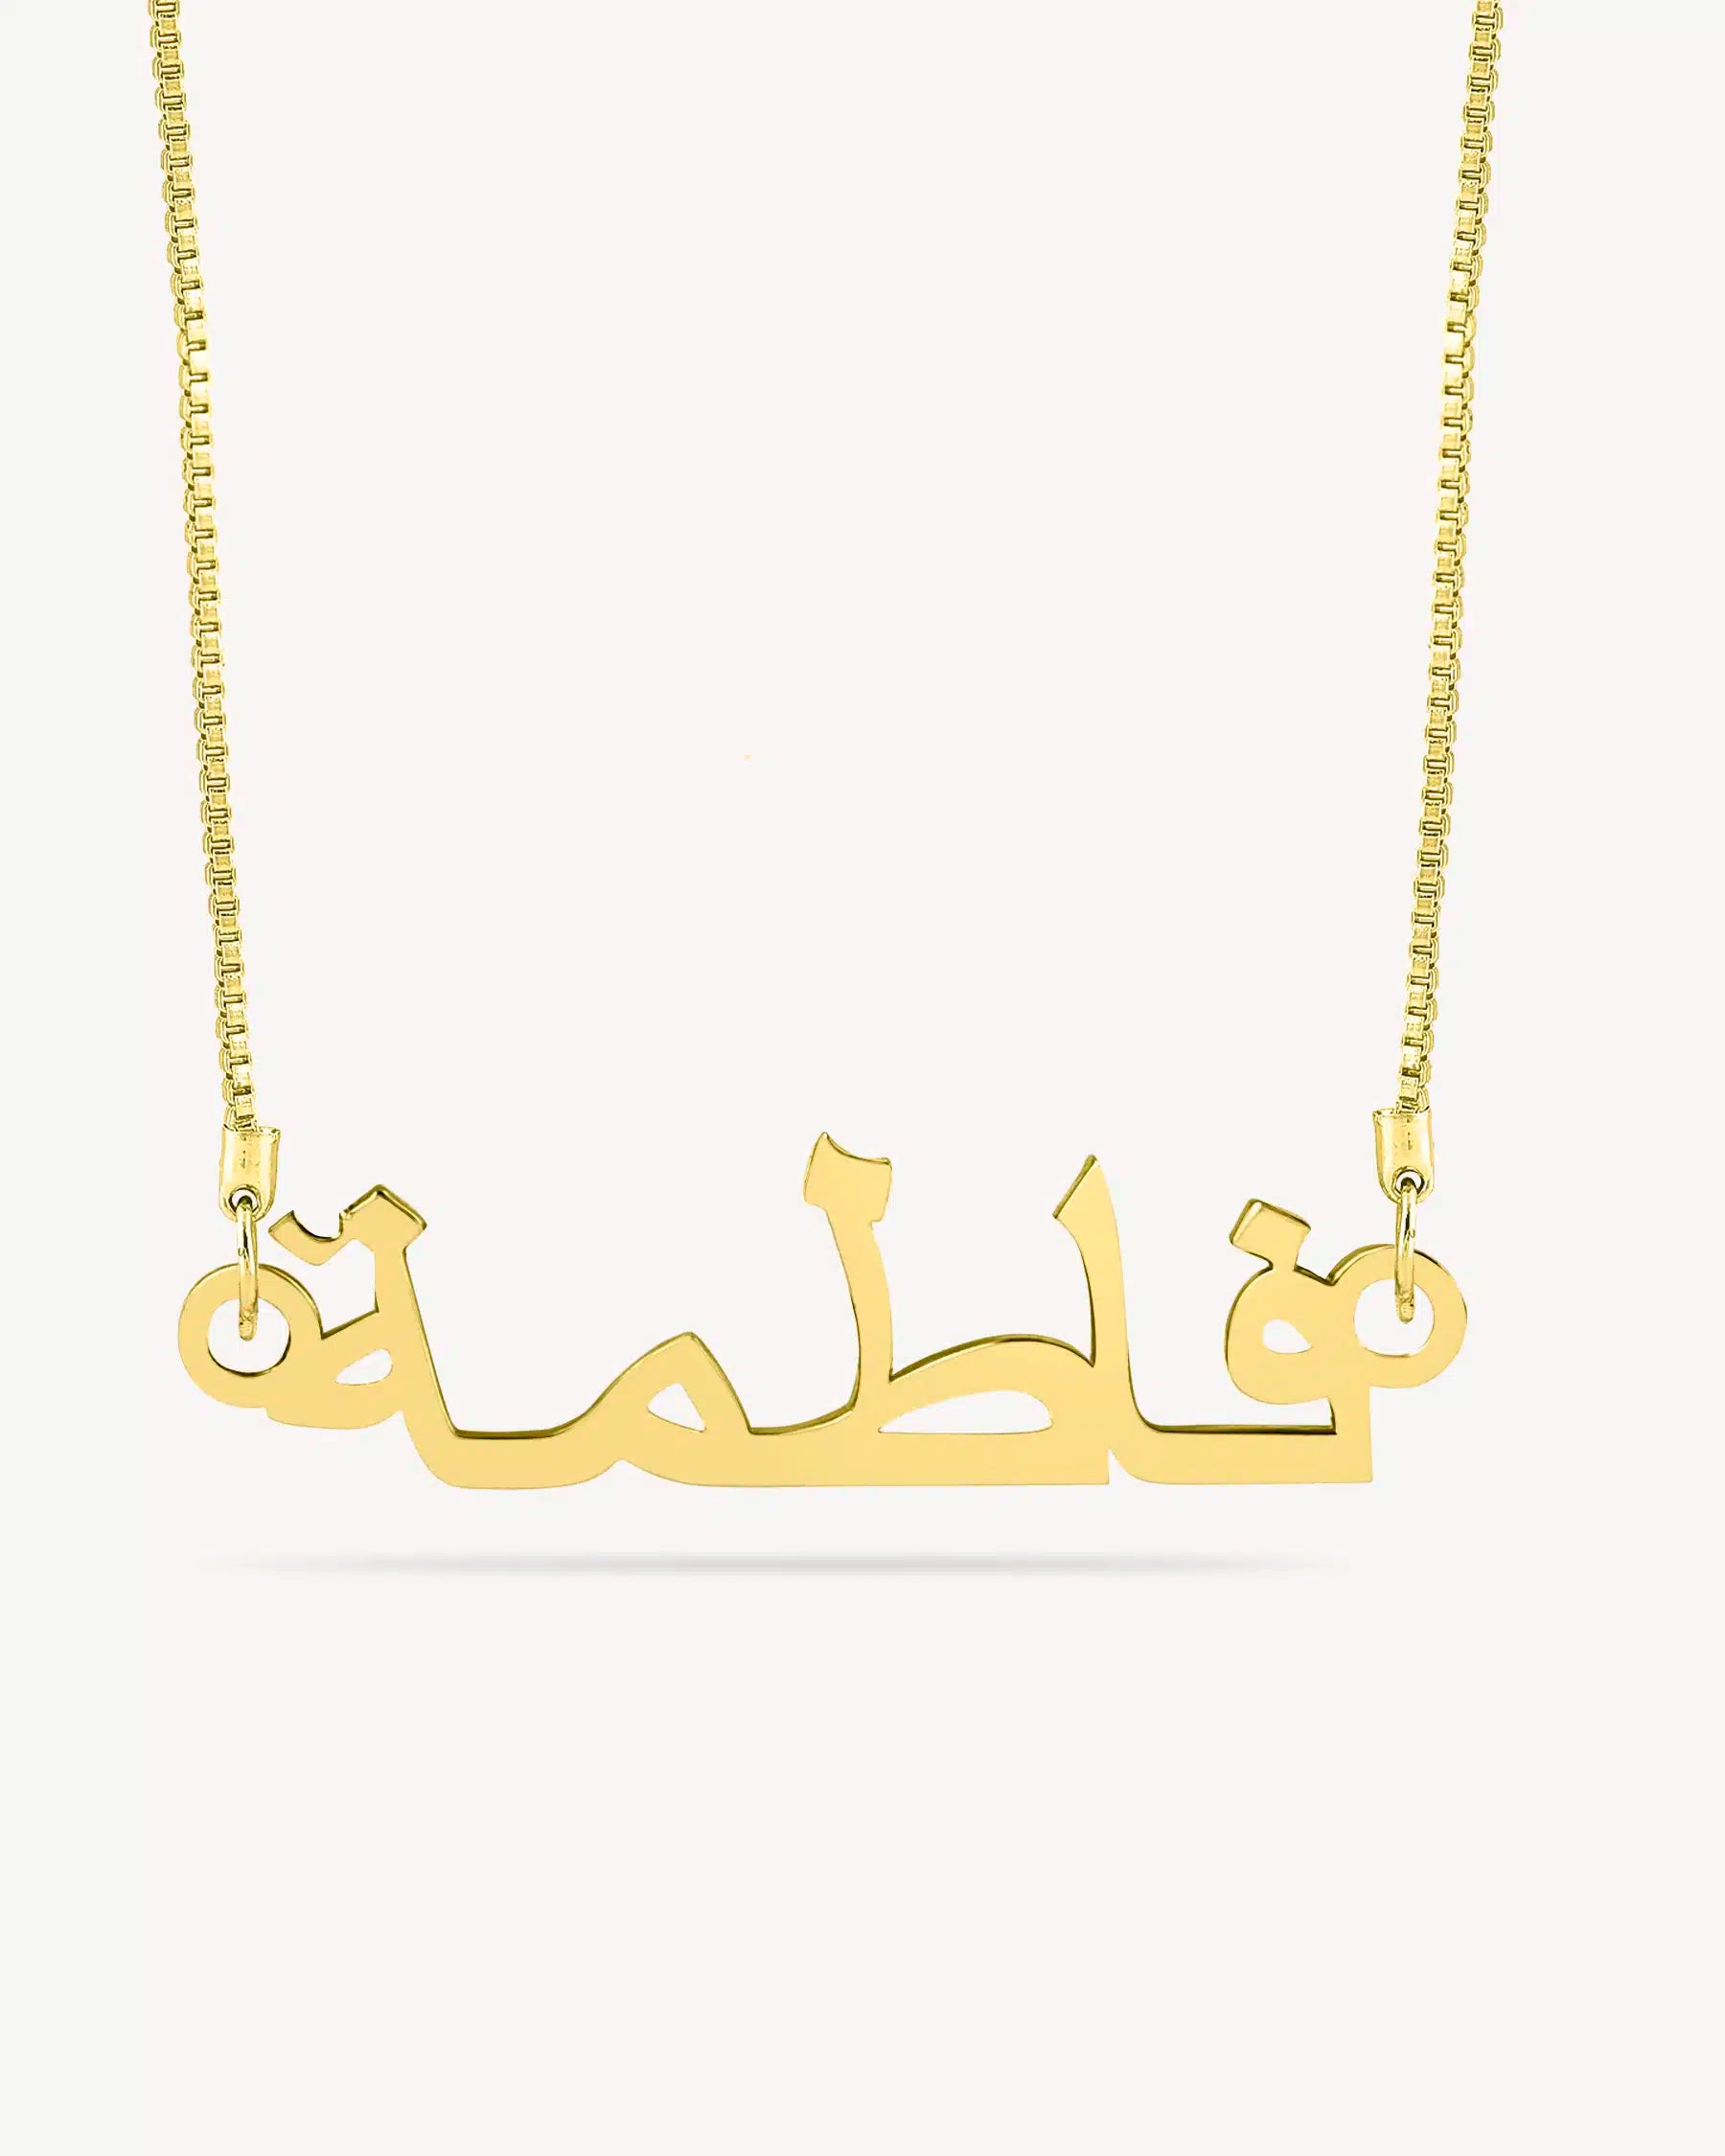 Name Necklace Personalised Sterling Silver Gold Arabic Gift for Her Mother  Girls | eBay